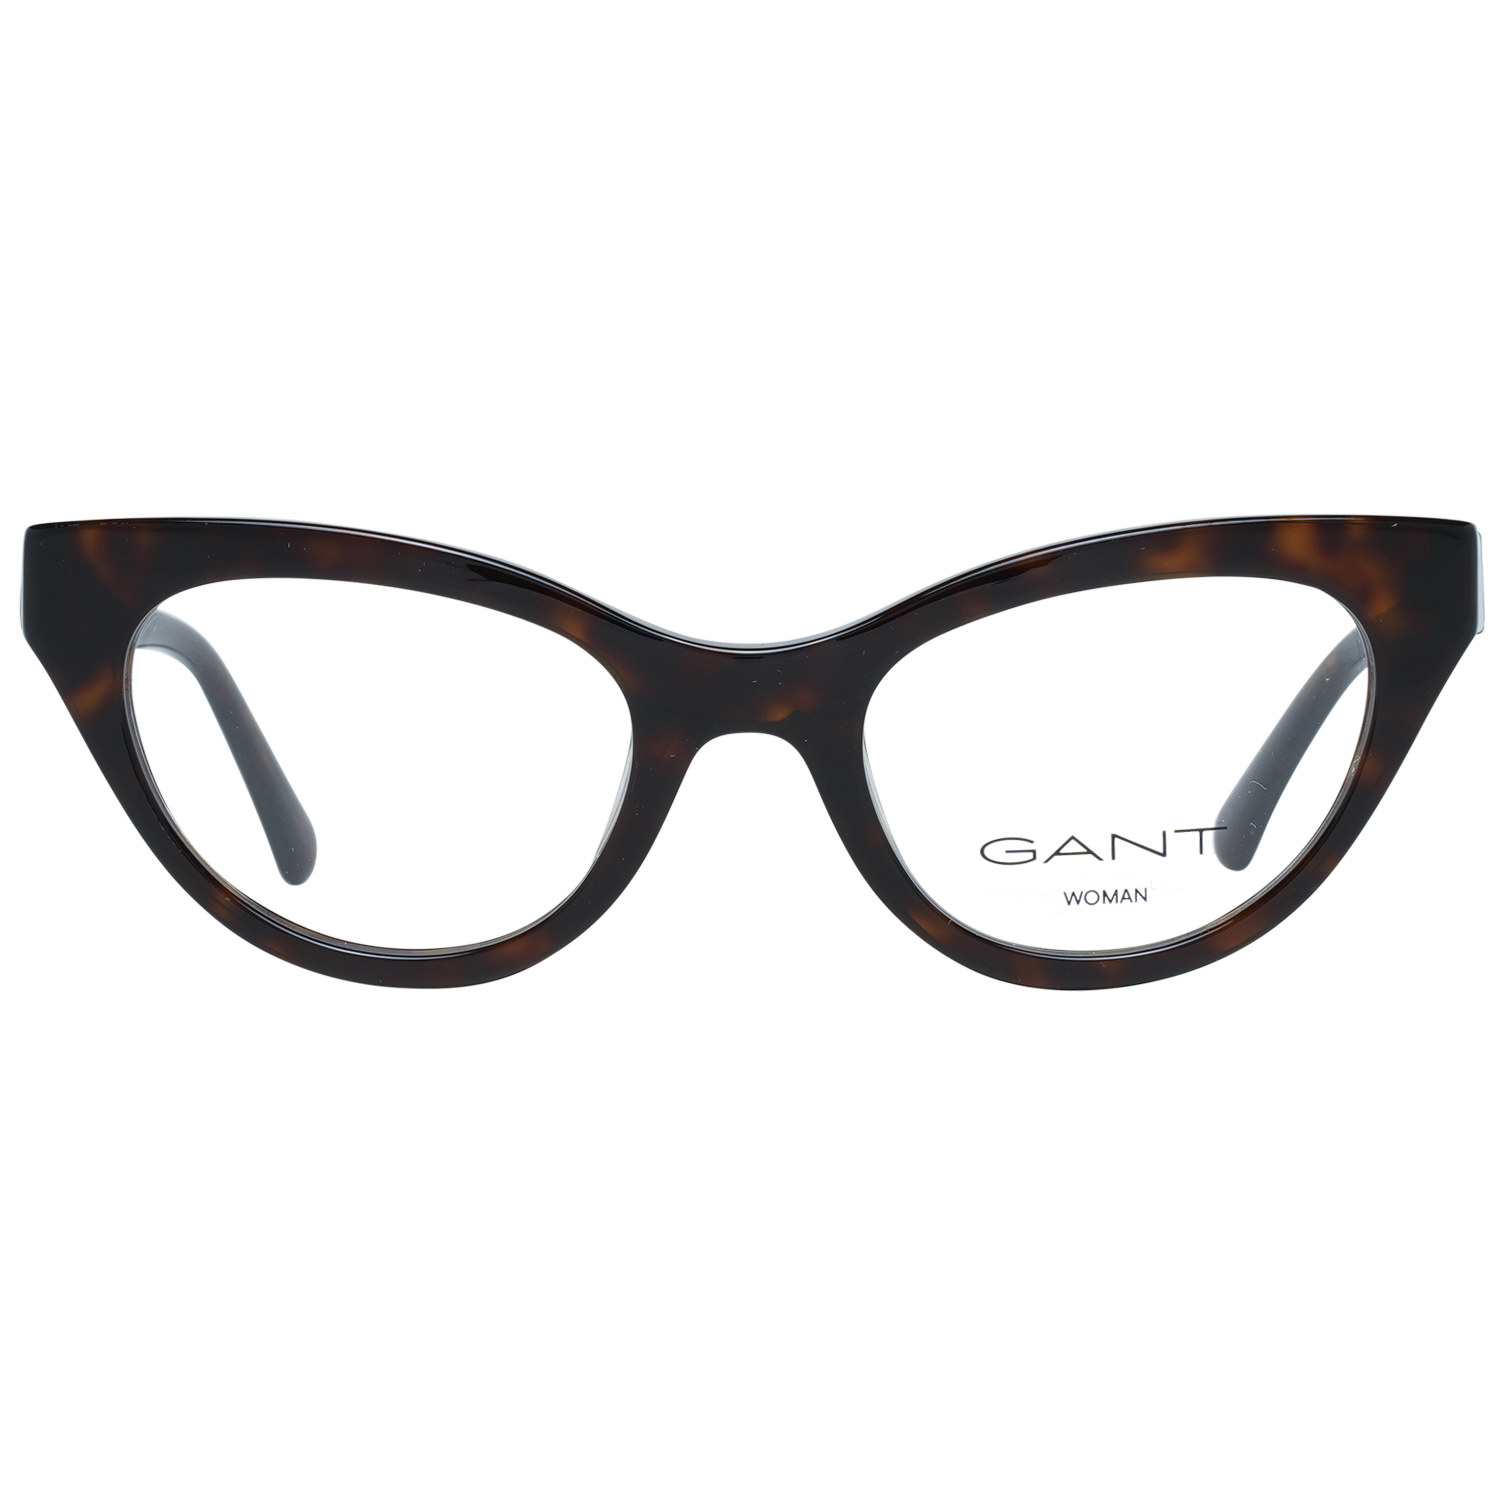 GenderWomenMain colorBrownFrame colorBrownFrame materialPlasticSize49-20-140Lenses width49mmLenses heigth34mmBridge length20mmFrame width136mmTemple length140mmShipment includesCase, Cleaning clothStyleFull-RimSpring hingeNo